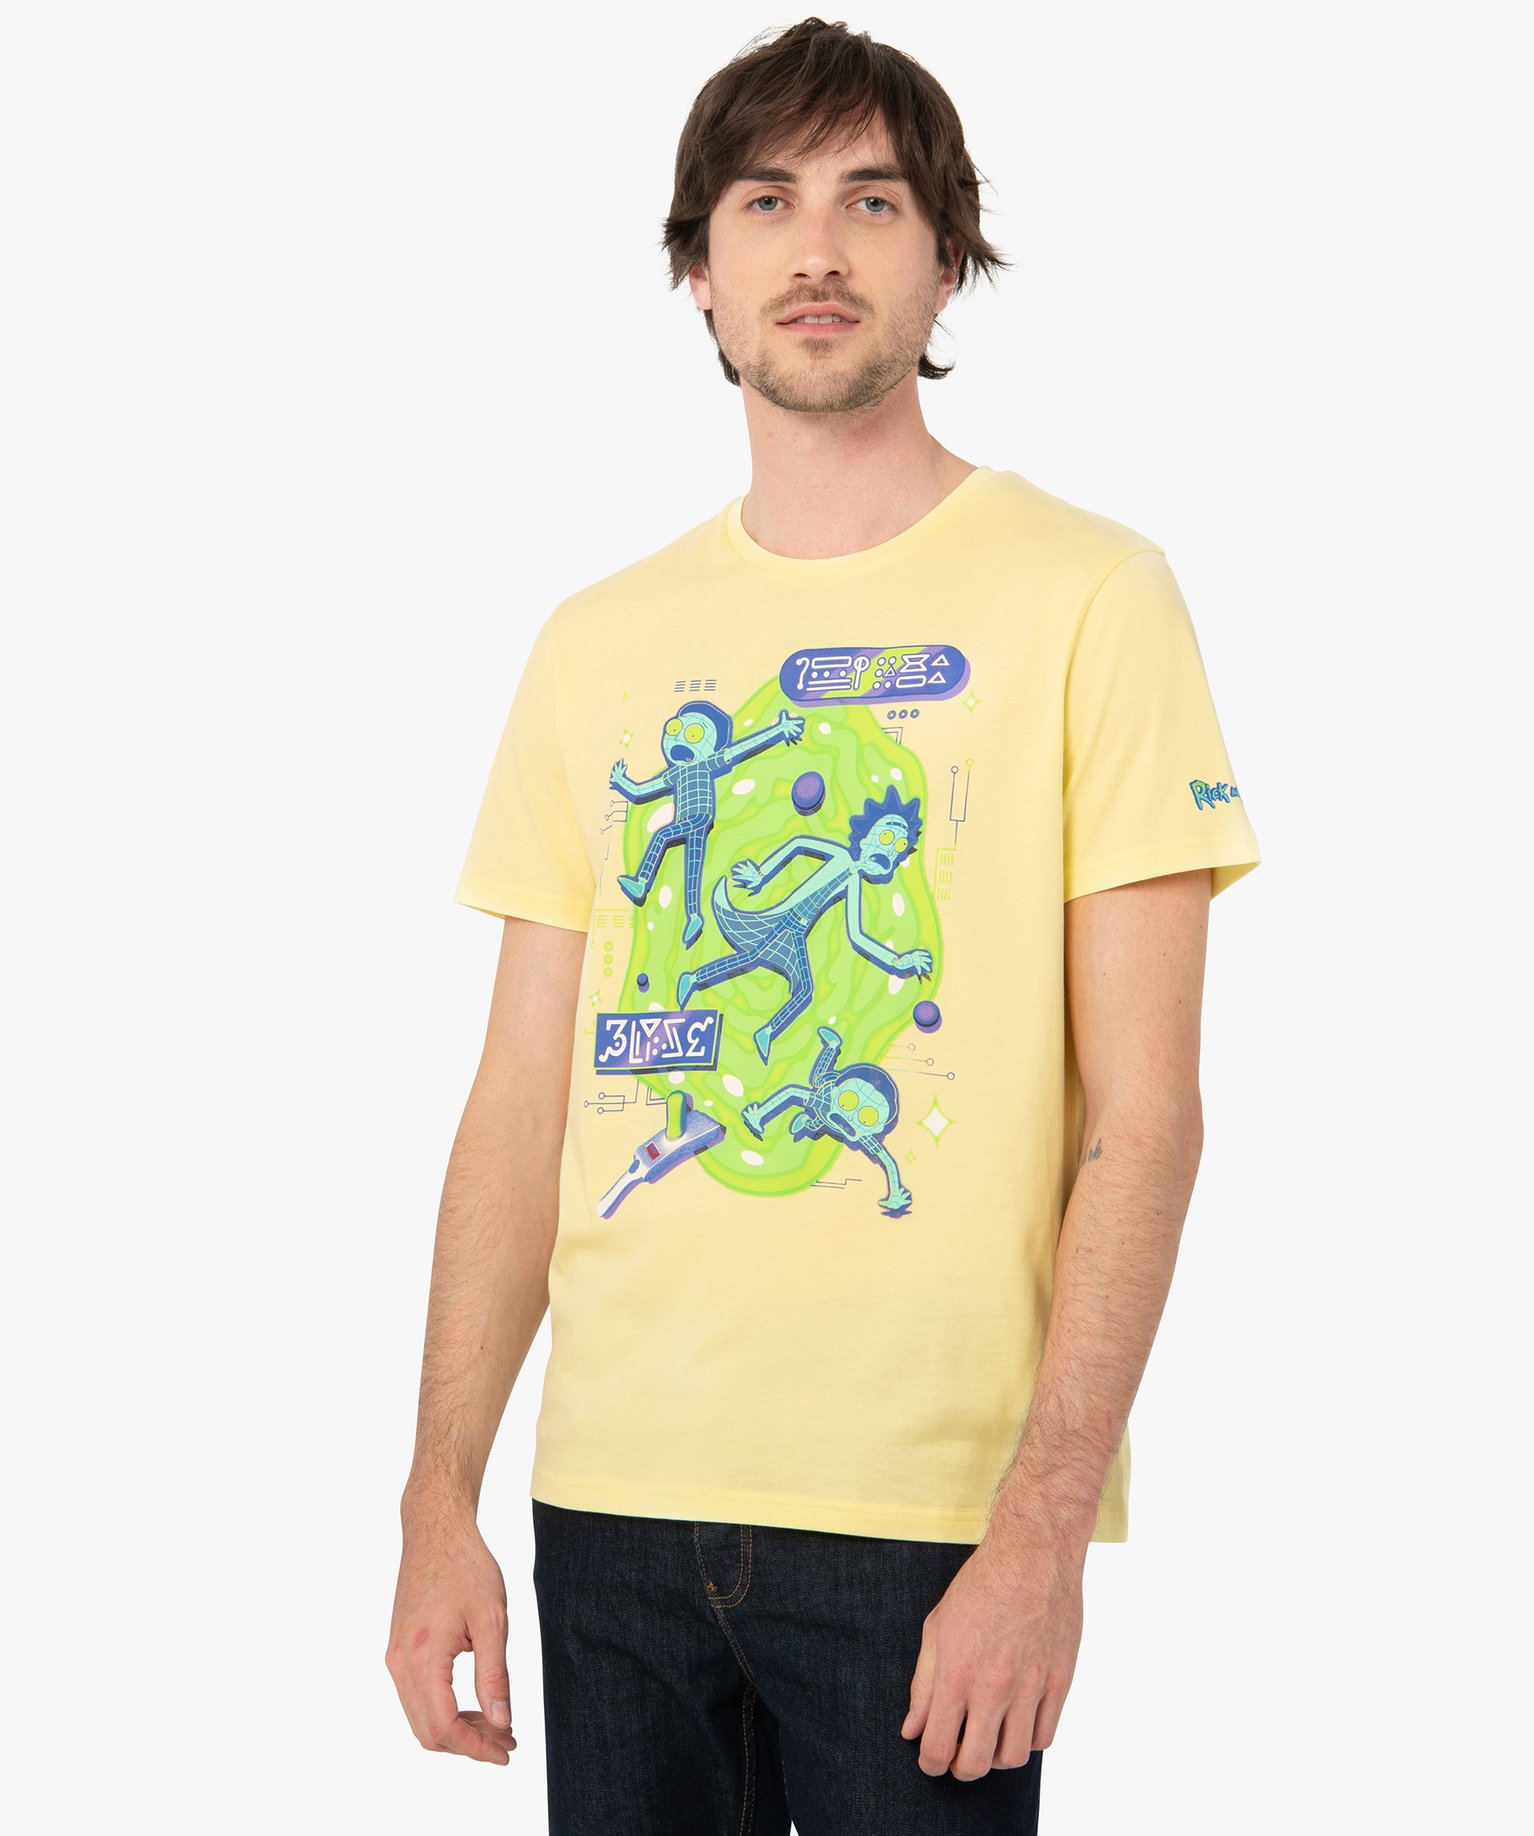 tee-shirt homme a manches courtes motif xxl - rick and morty jaune tee-shirts